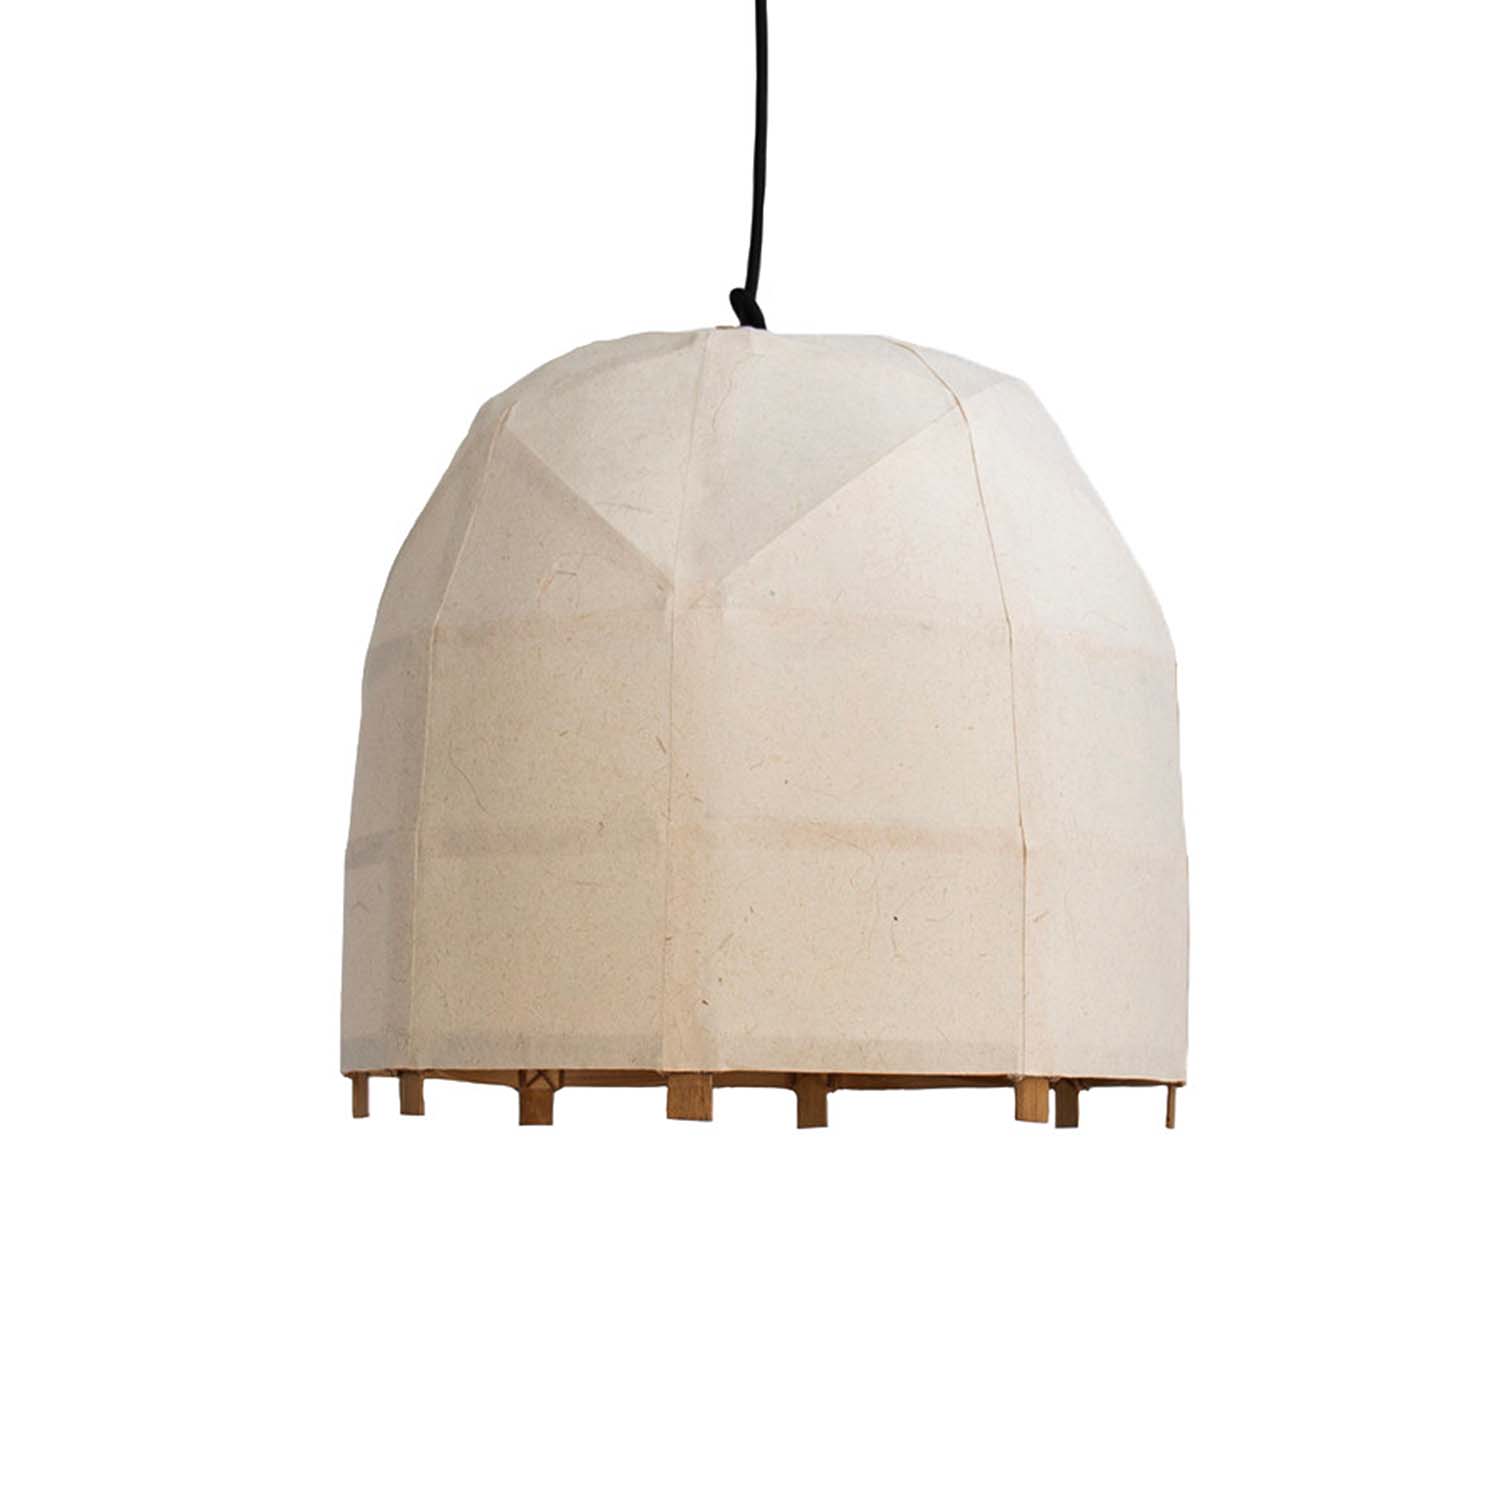 BAGOBO O - Cage pendant lamp in bamboo and white paper